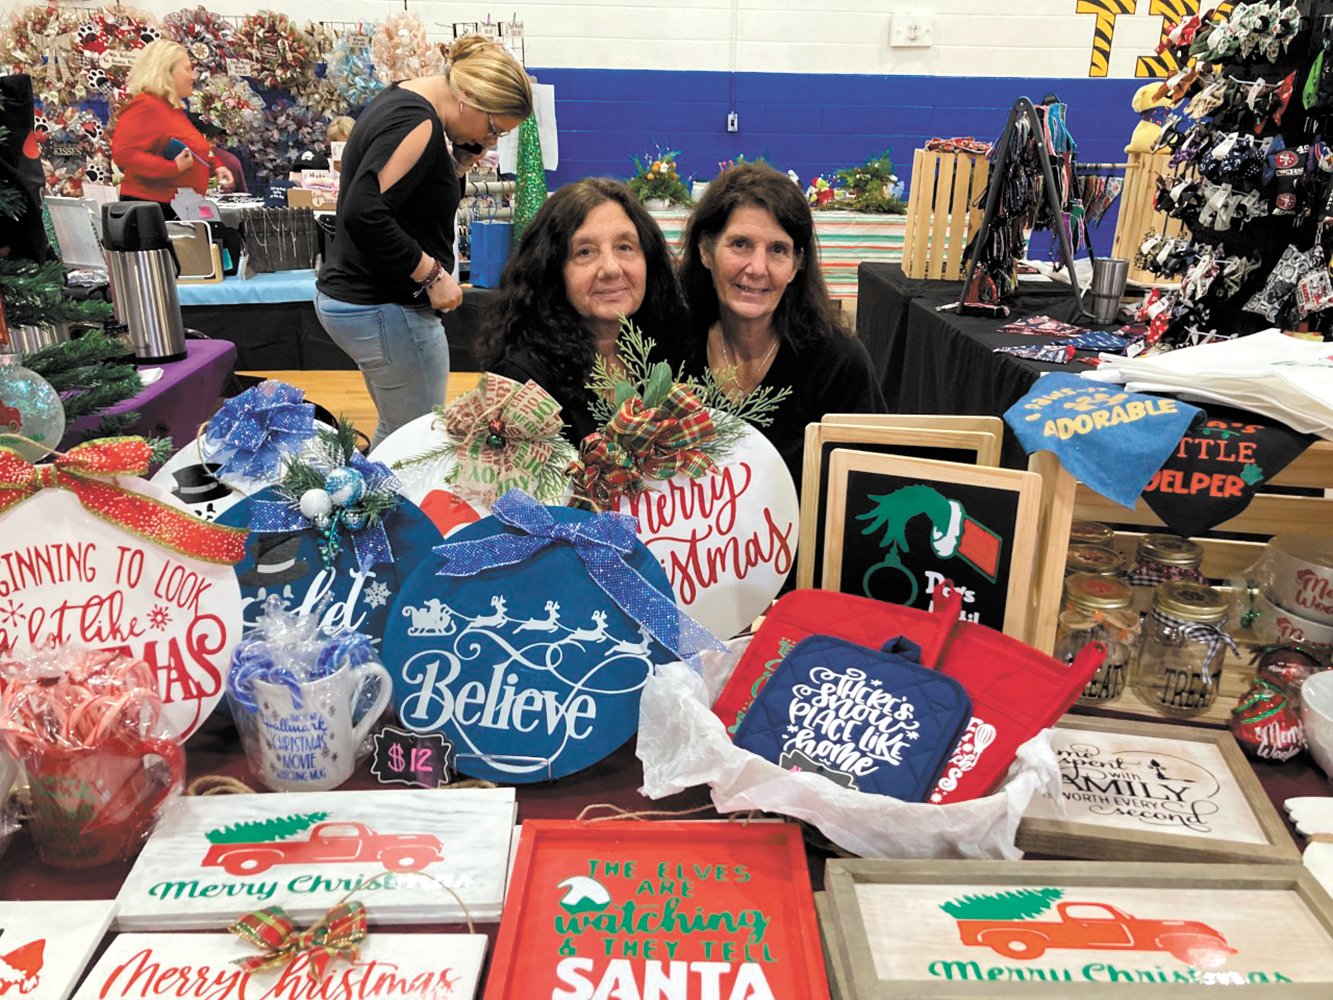 HOLIDAY SIGNS: If you’re in need of a holiday sign, custom bags or baby bibs, Becky Doughty (left) and Robin Pallini of Cutesy Crafts have you covered. Doughty started creating handmade signs several years ago, and she started selling them last year.